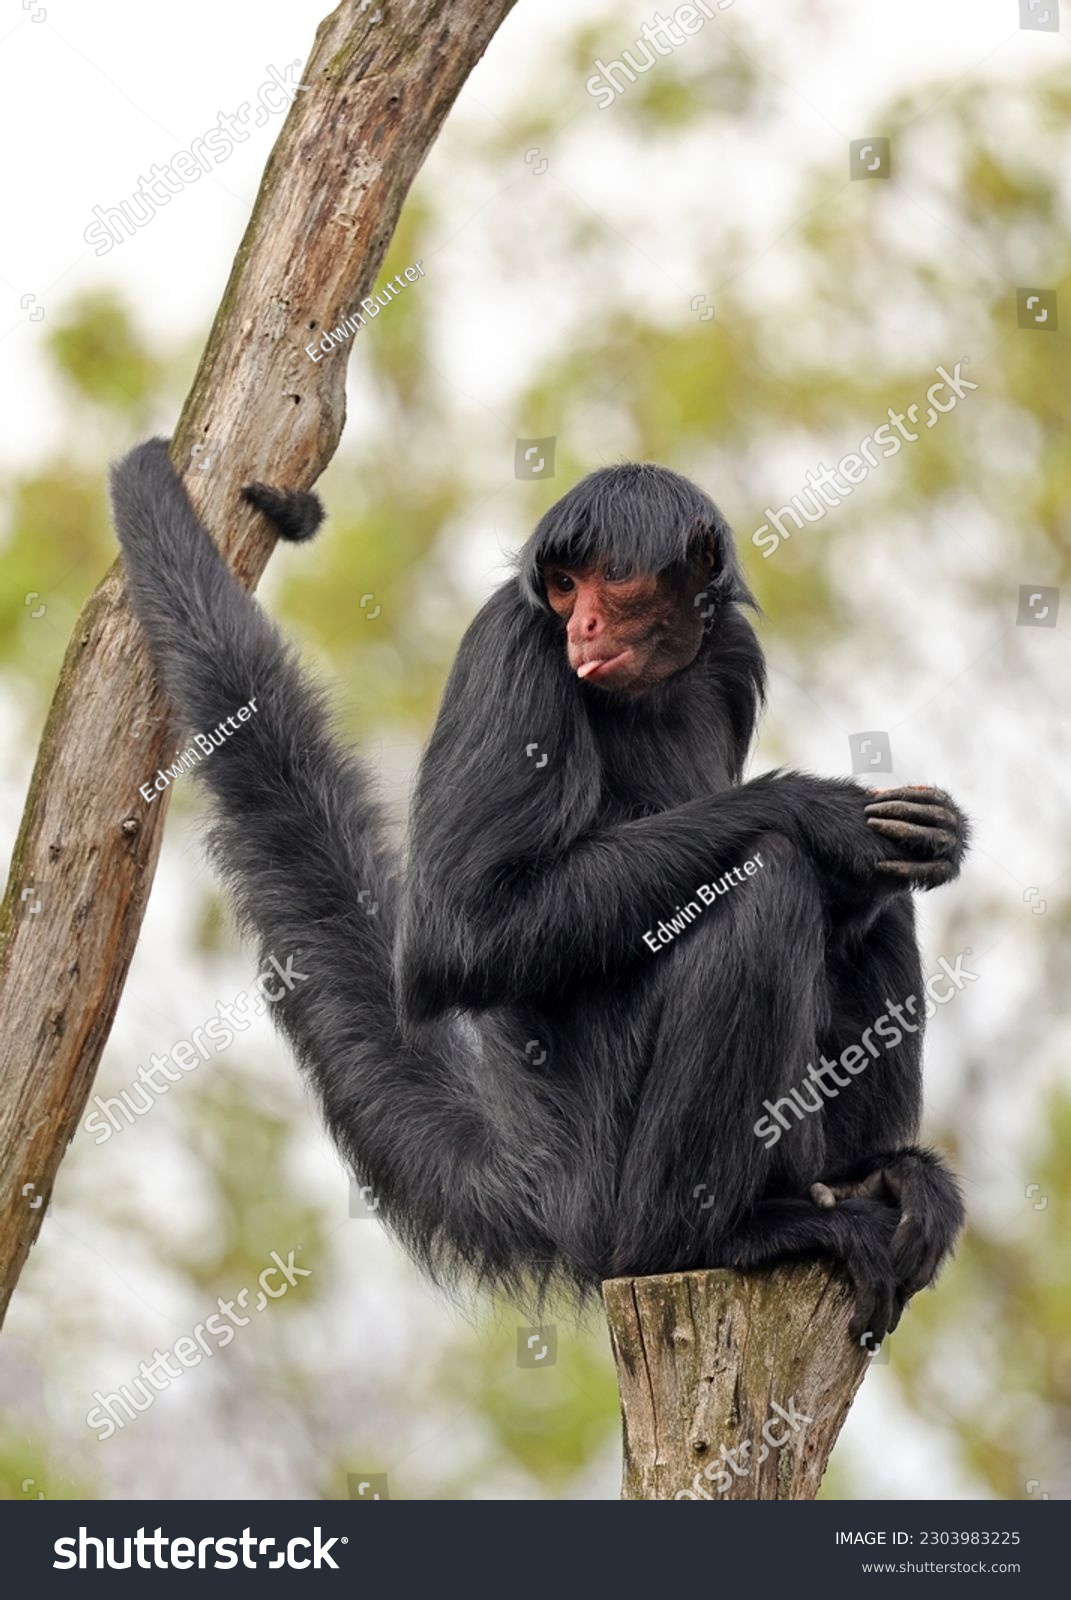 Red-faced spider monkey, Ateles paniscus, also known as the Guiana spider monkey or red-faced black spider monkey #2303983225